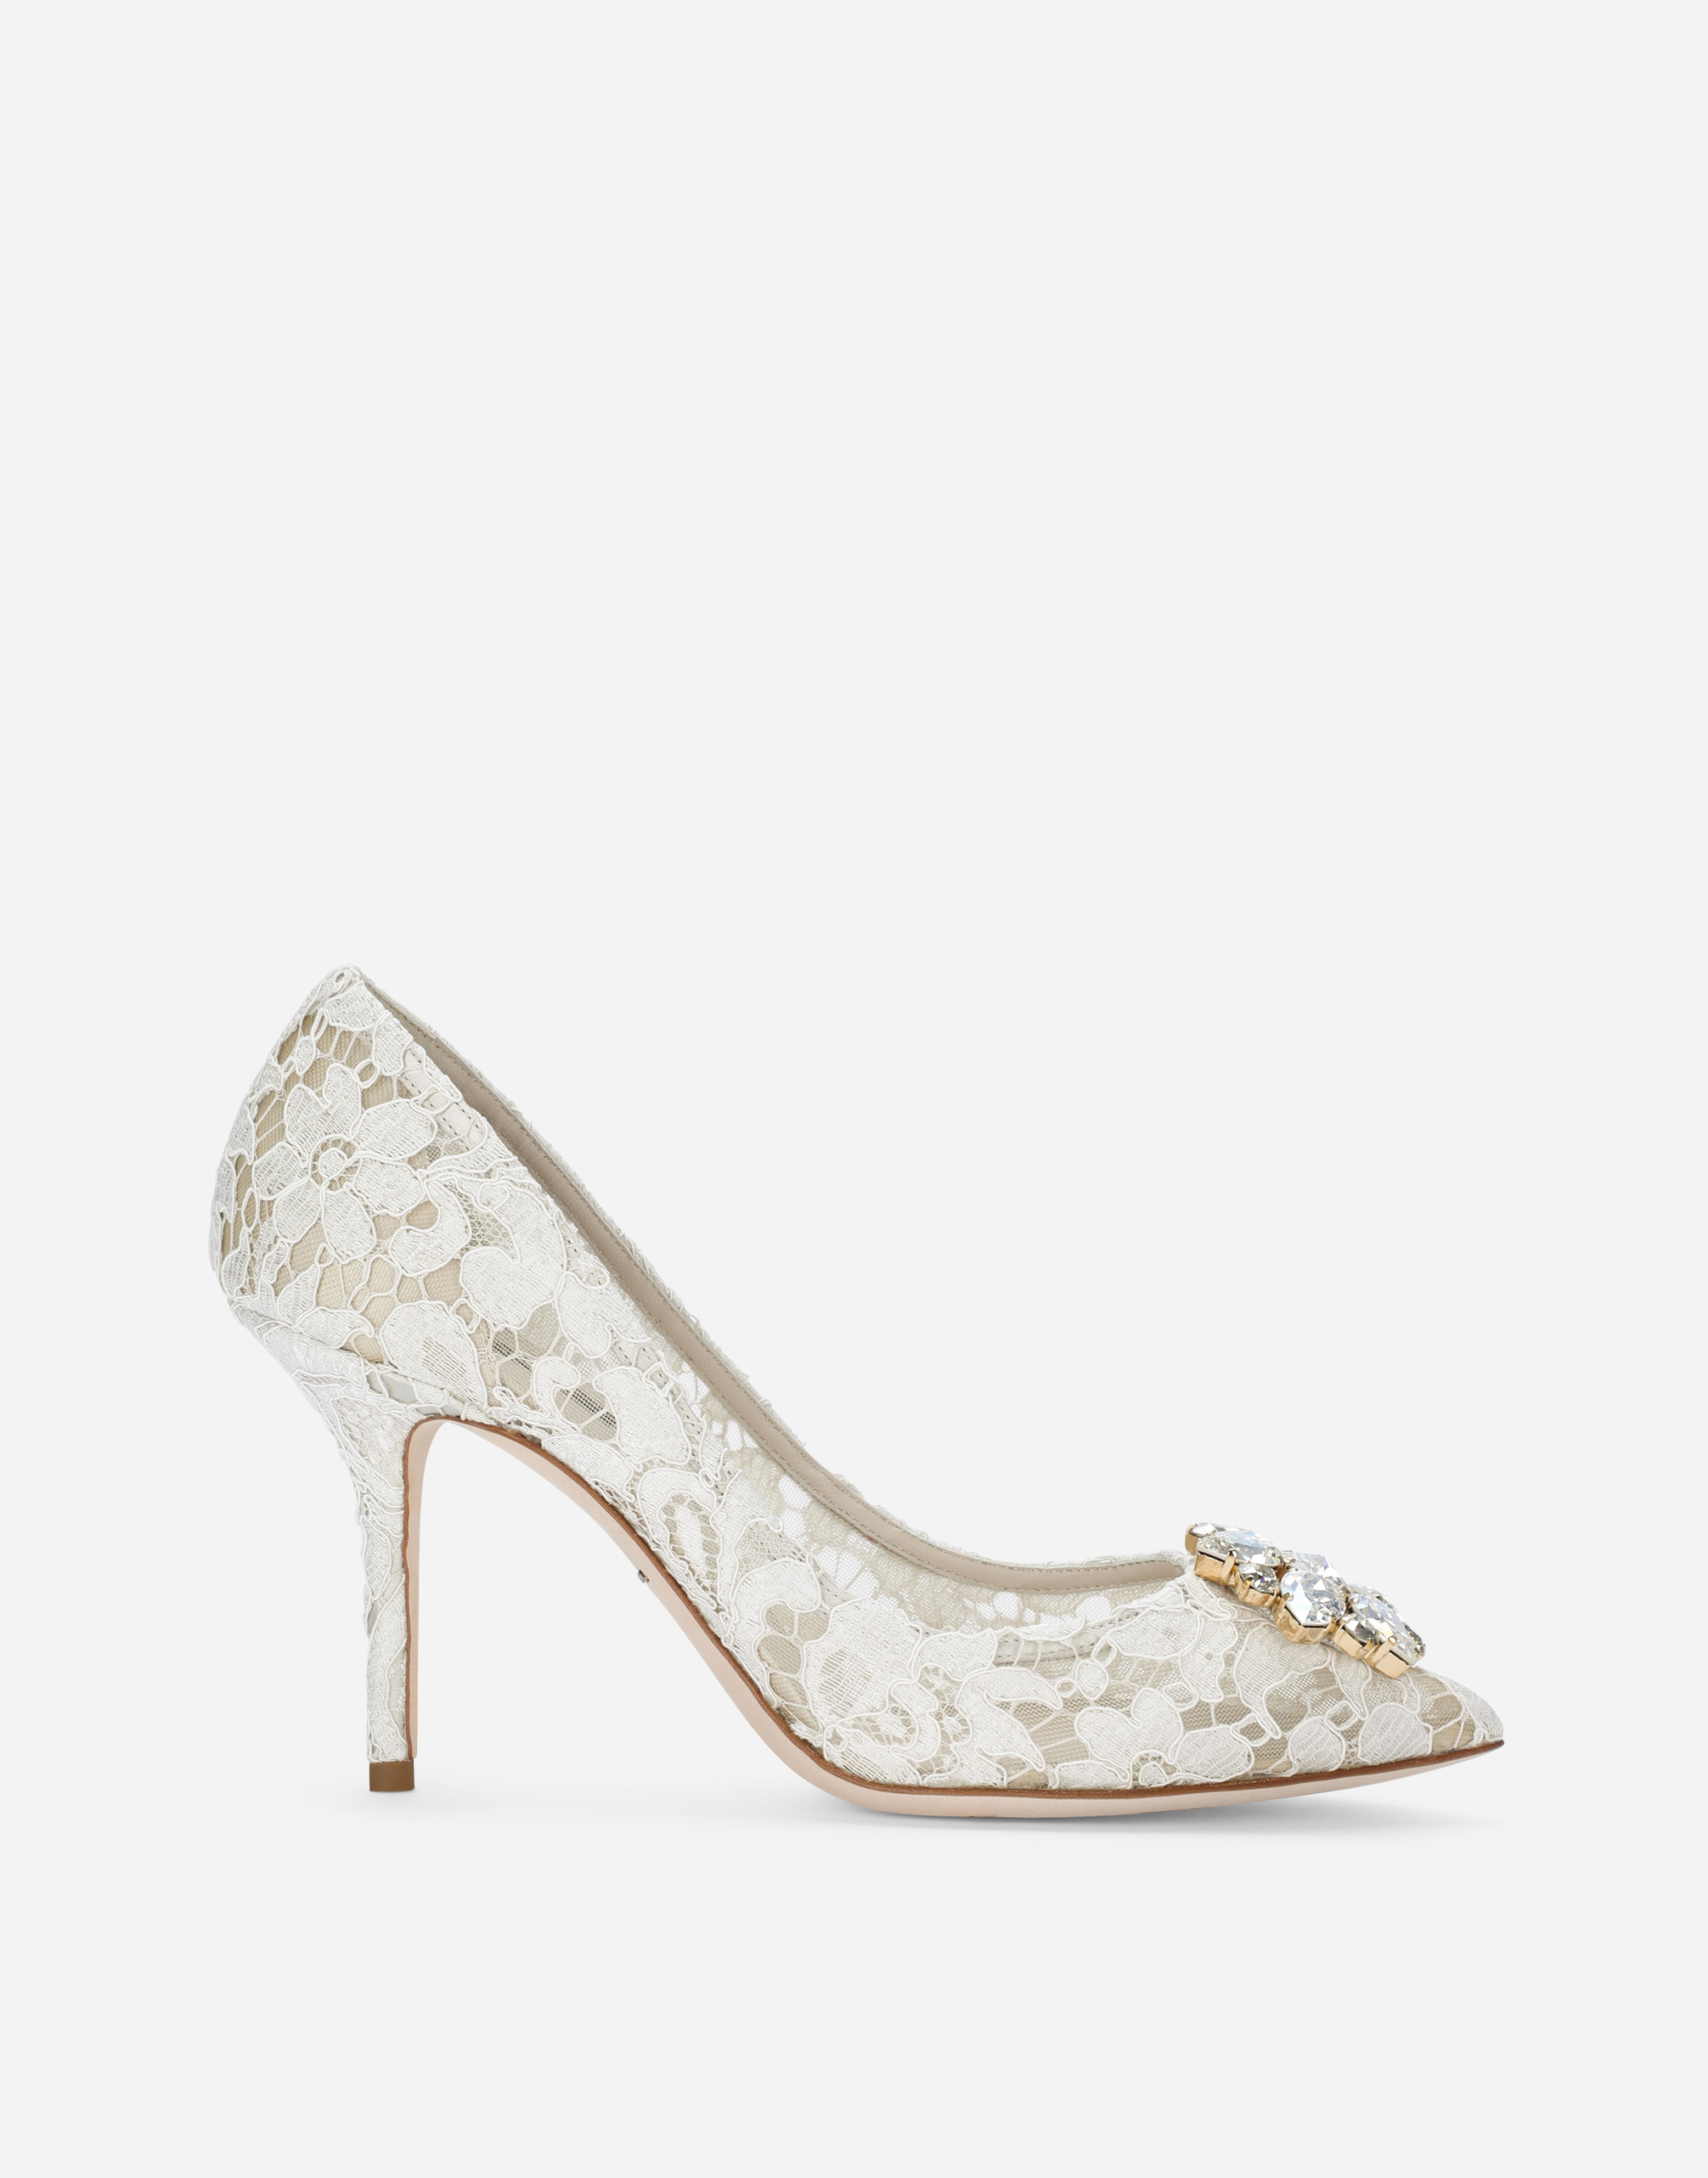 Pump In Taormina Lace With Crystals 